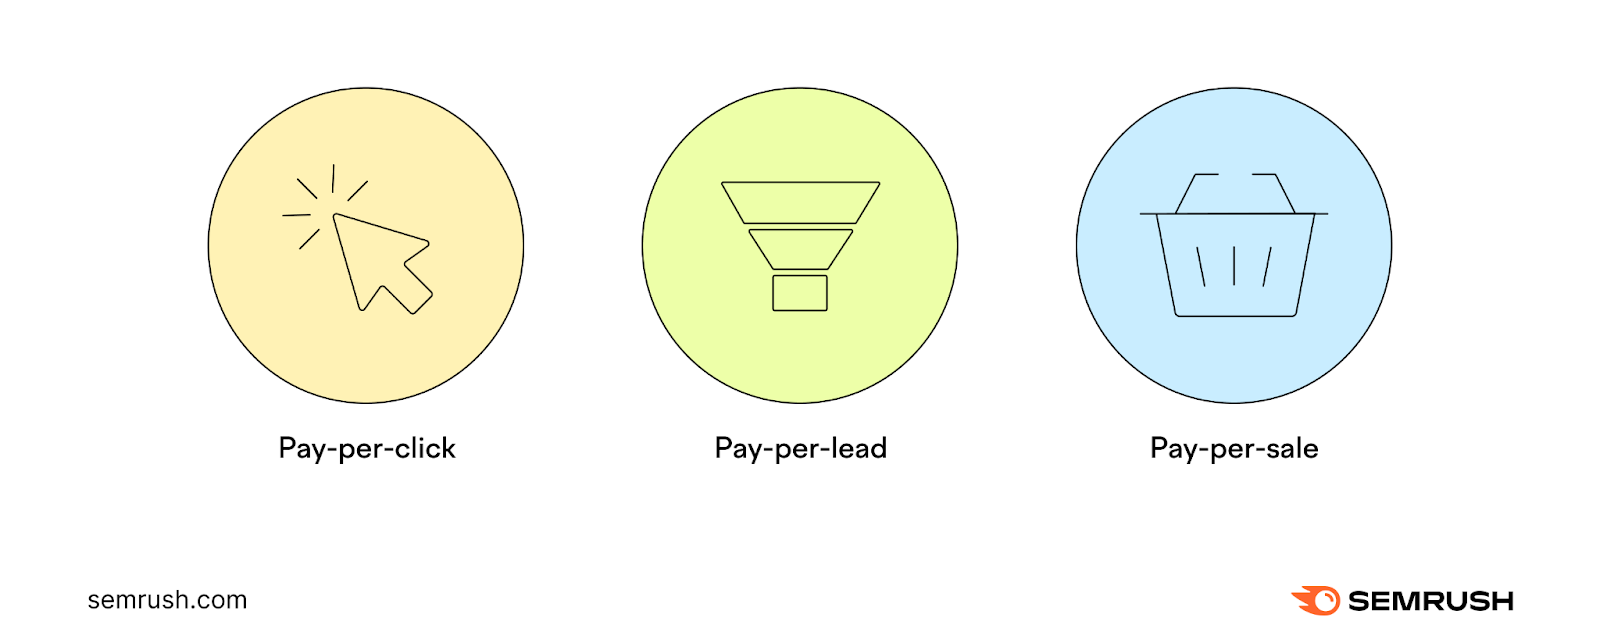 An illustration showing pay-per-click, pay-per-lead, and pay-per-sale committee  structures